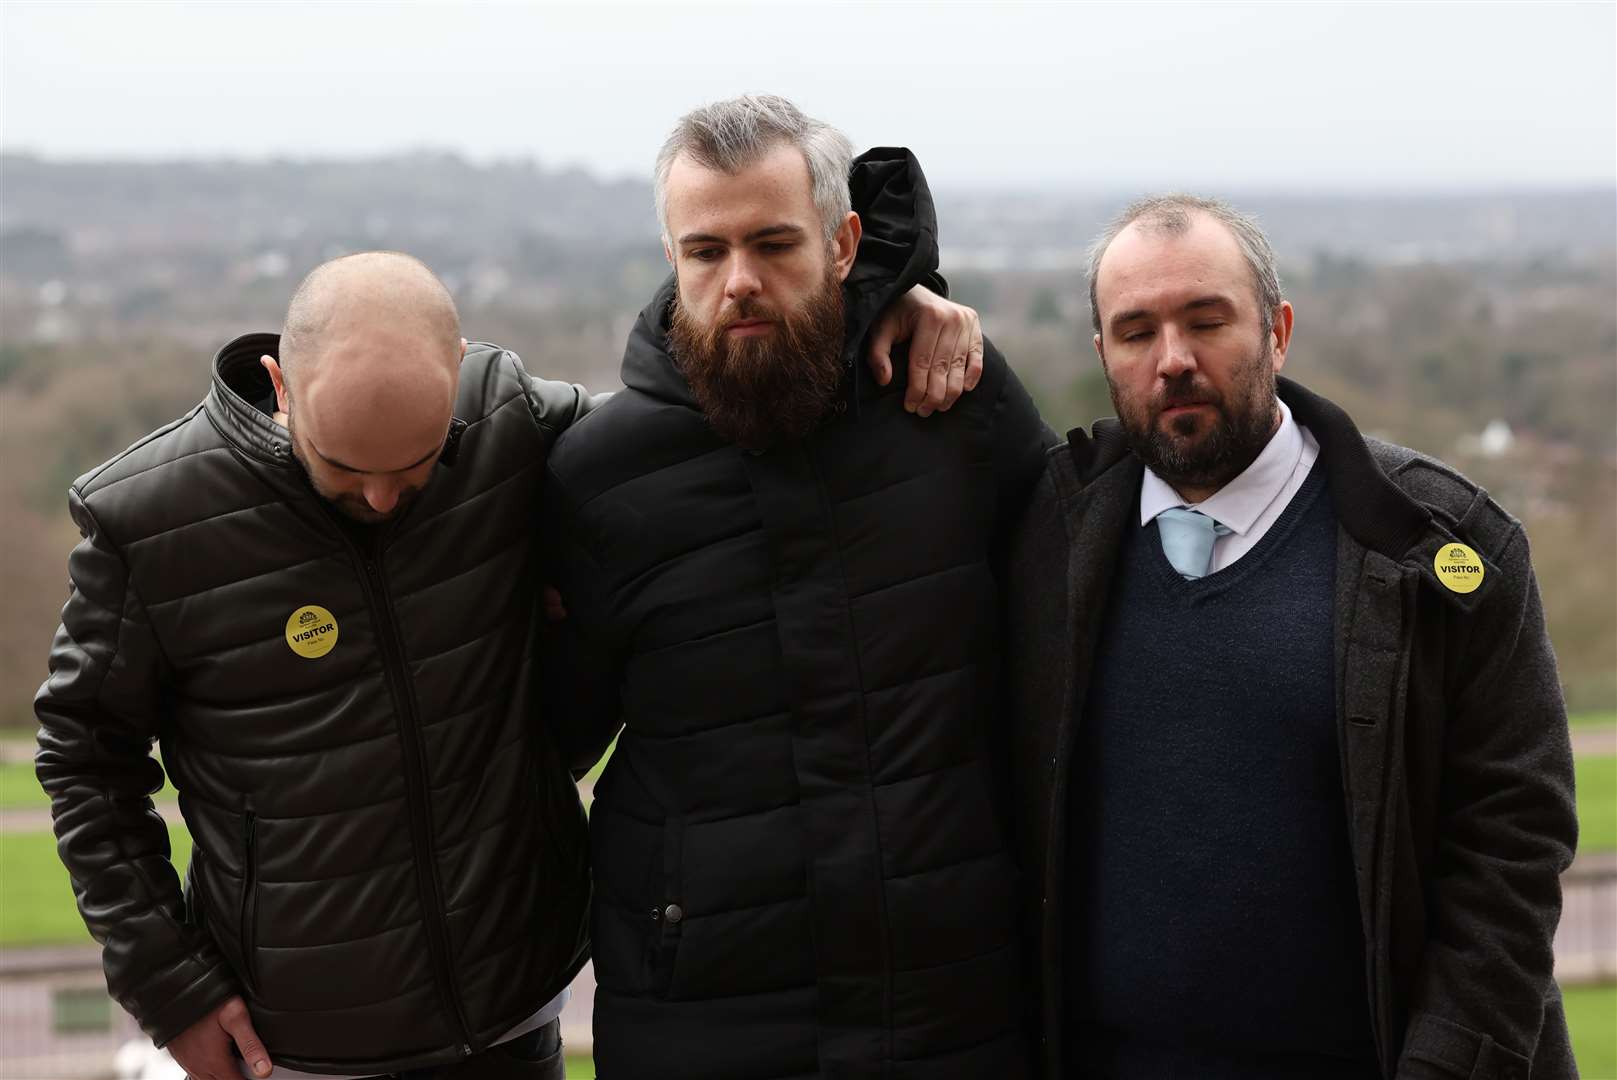 Natalie McNally’s brothers (left to right) Declan, Niall and Brendan during a vigil for women who have died in violent circumstances outside the Parliament Buildings, Belfast. (Liam McBurney/PA)